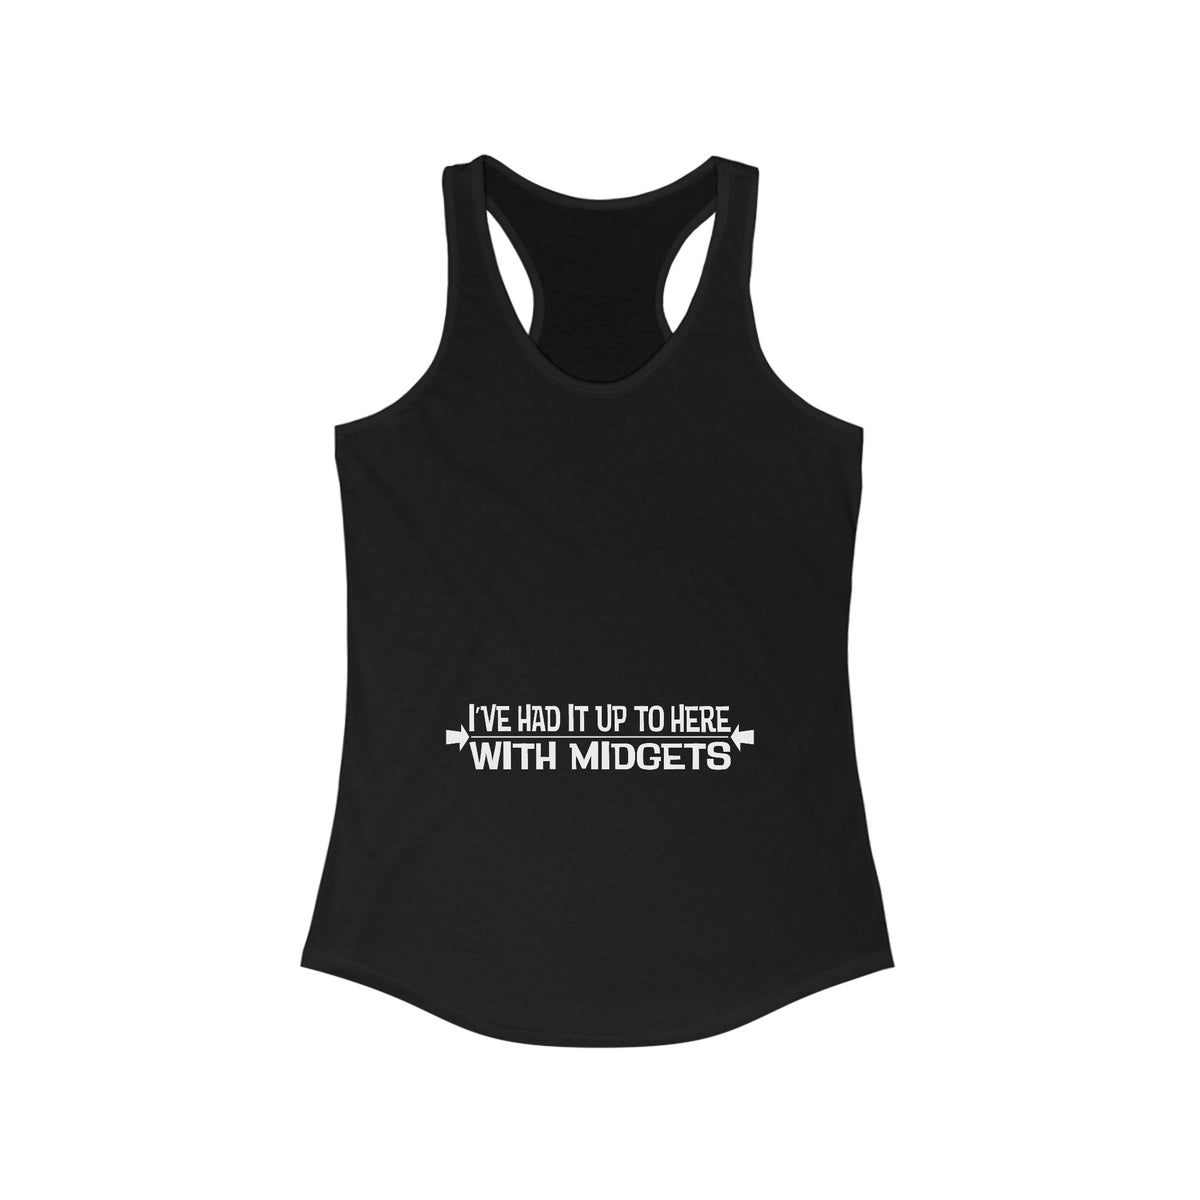 I've Had It Up To Here With Midgets - Women’s Racerback Tank